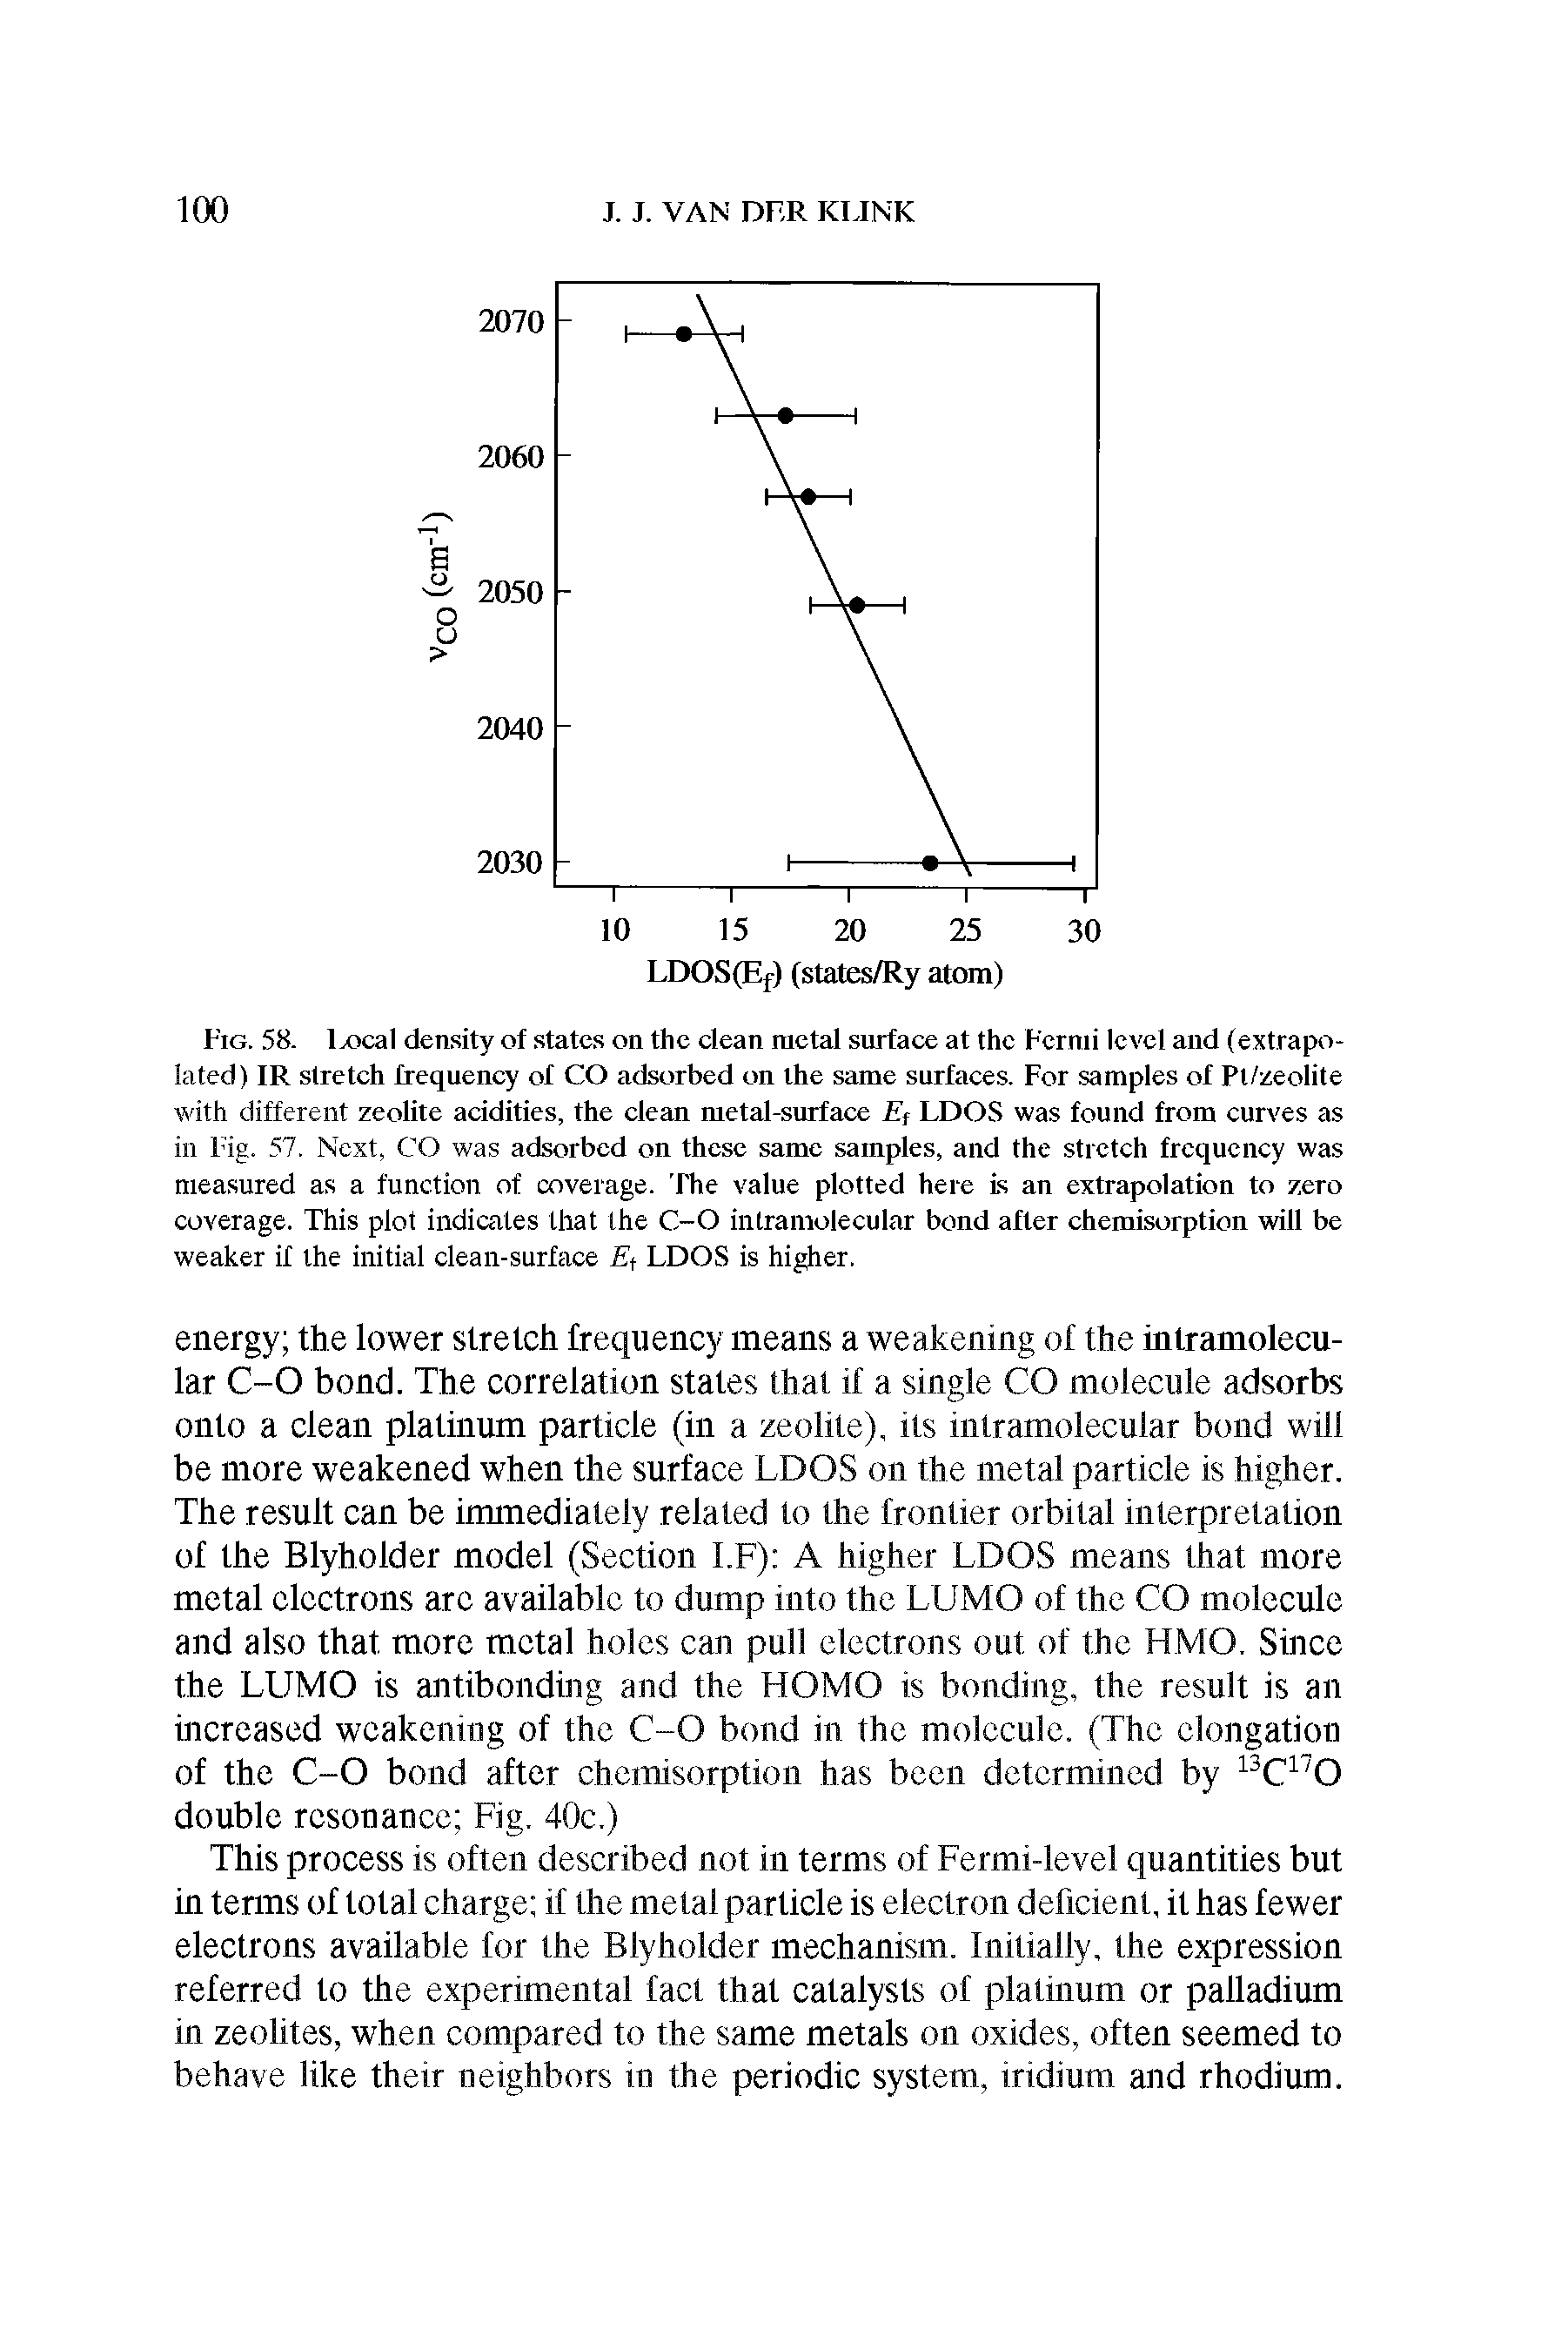 Fig. 58. Ixical density of states on the clean metal surface at the Fermi level and (extrapolated) IR stretch frequency of CO adsorbed on the same surfaces. For samples of Pl/zeolite with different zeolite acidities, the clean metal-surface Ef LDOS was found from curves as in 1 ig. 57. Next, CO was adsorbed on these same samples, and the stretch frequency was measured as a function of coverage. The value plotted here is an extrapolation to zero coverage. This plot indicates that the C-O intramolecular bond after chemisorption will be weaker if the initial clean-surface LDOS is higher.